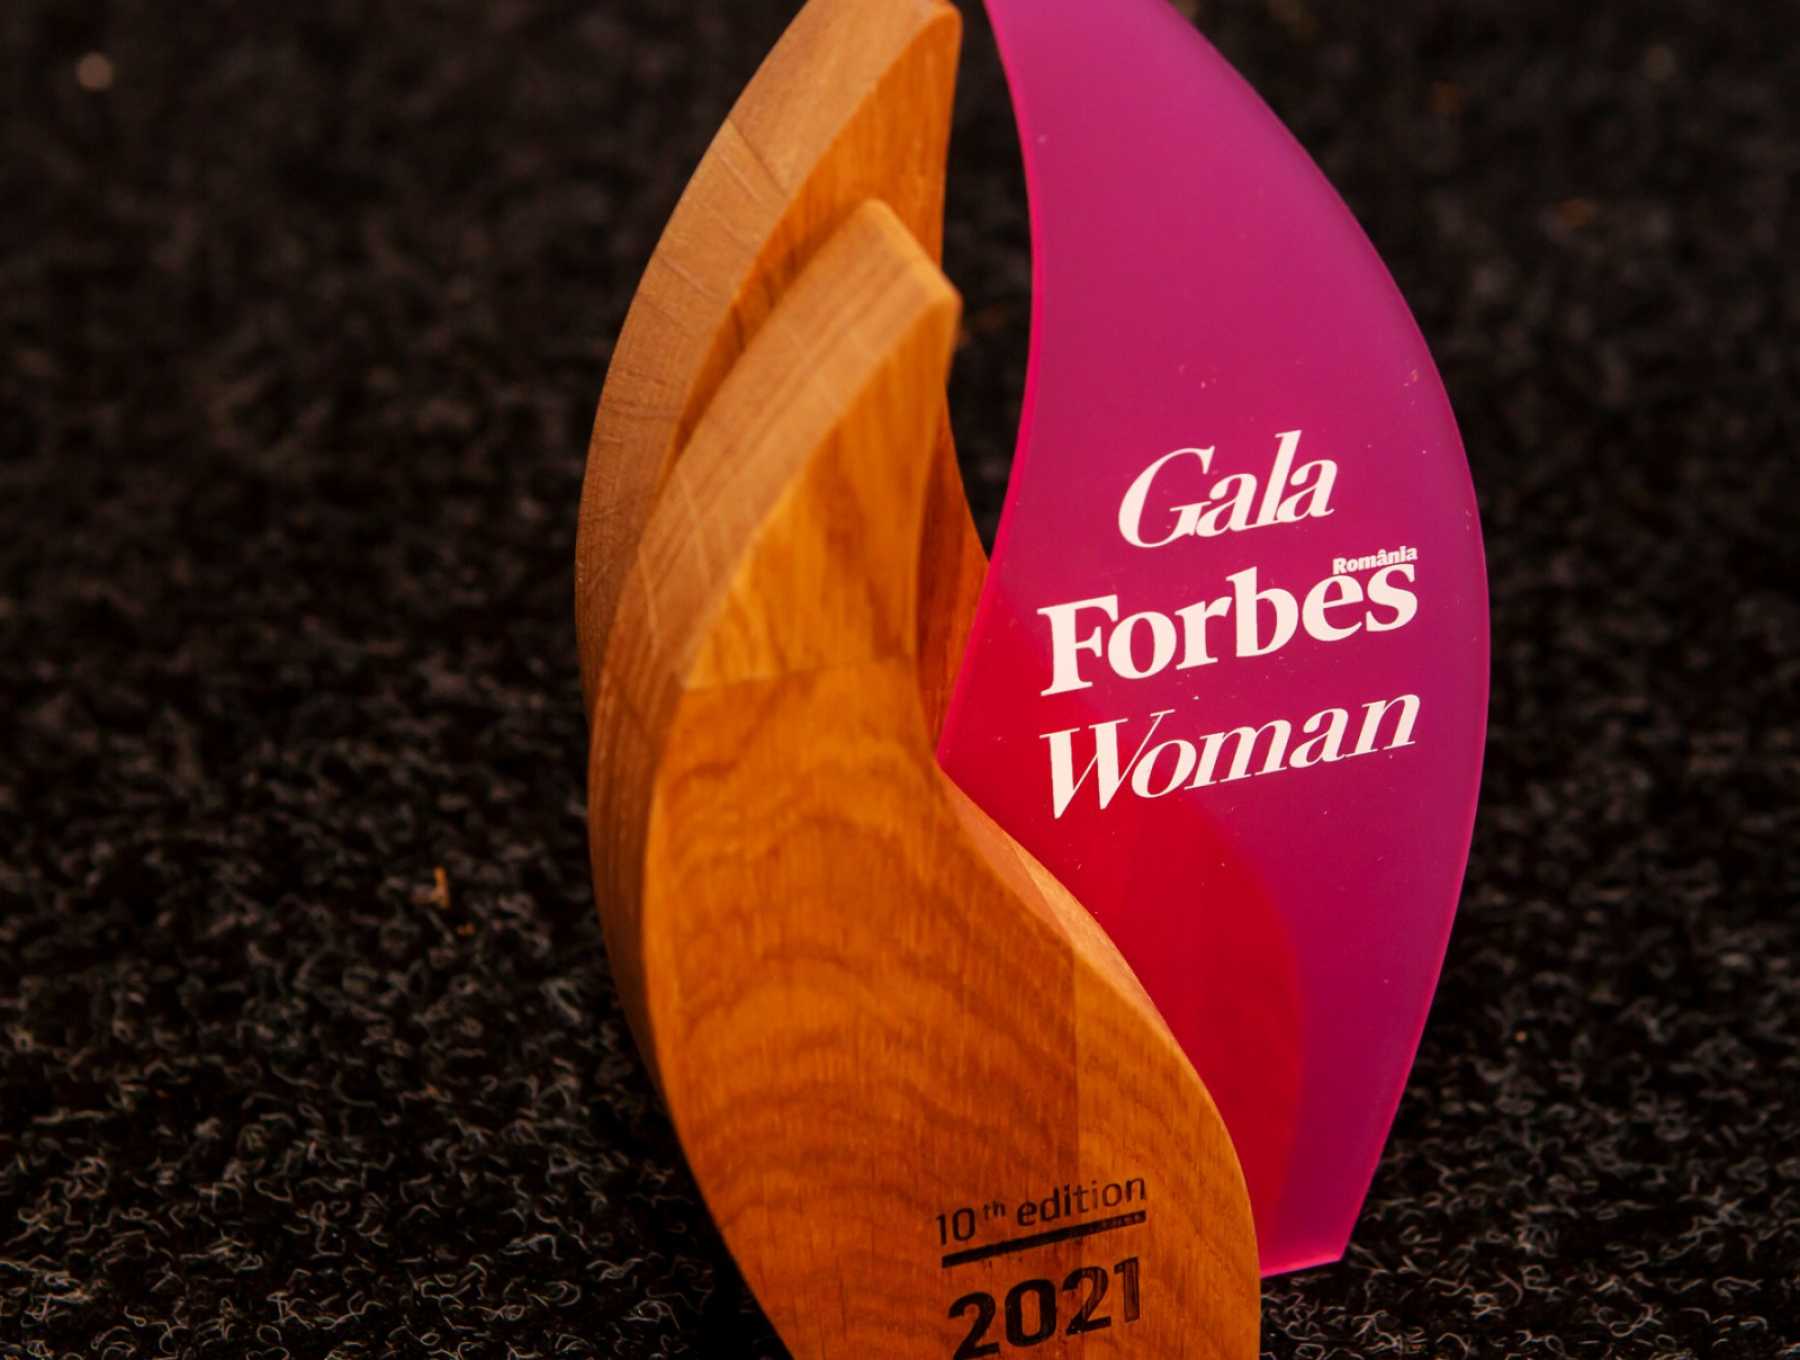 Cristina Căpitanu and Elena Oancea, awarded as ”The most influential women in interior design in Romania” at Forbes Women 2021 Gala